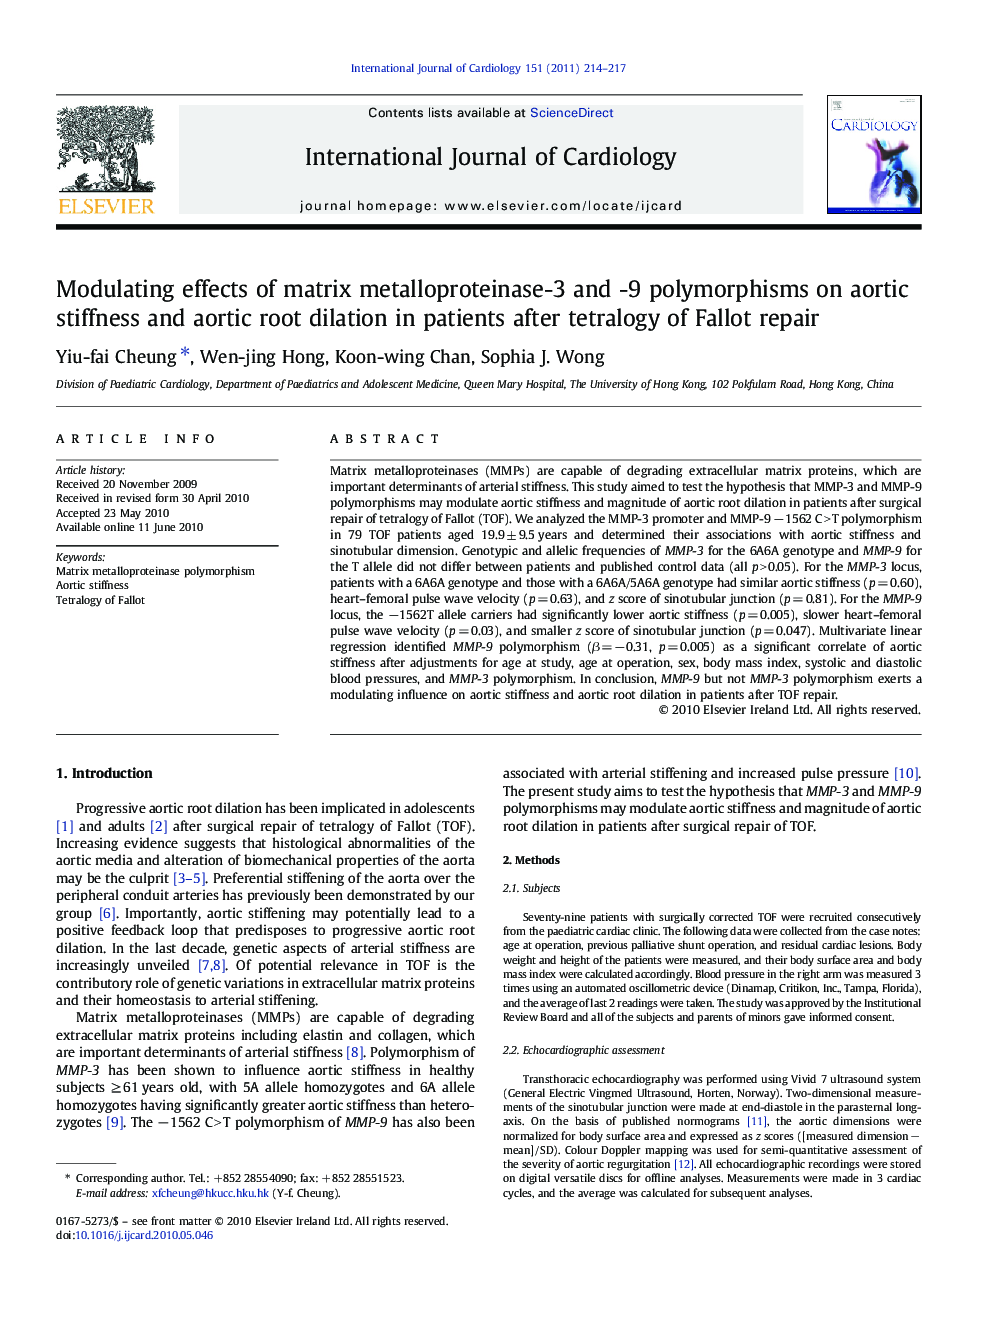 Modulating effects of matrix metalloproteinase-3 and -9 polymorphisms on aortic stiffness and aortic root dilation in patients after tetralogy of Fallot repair